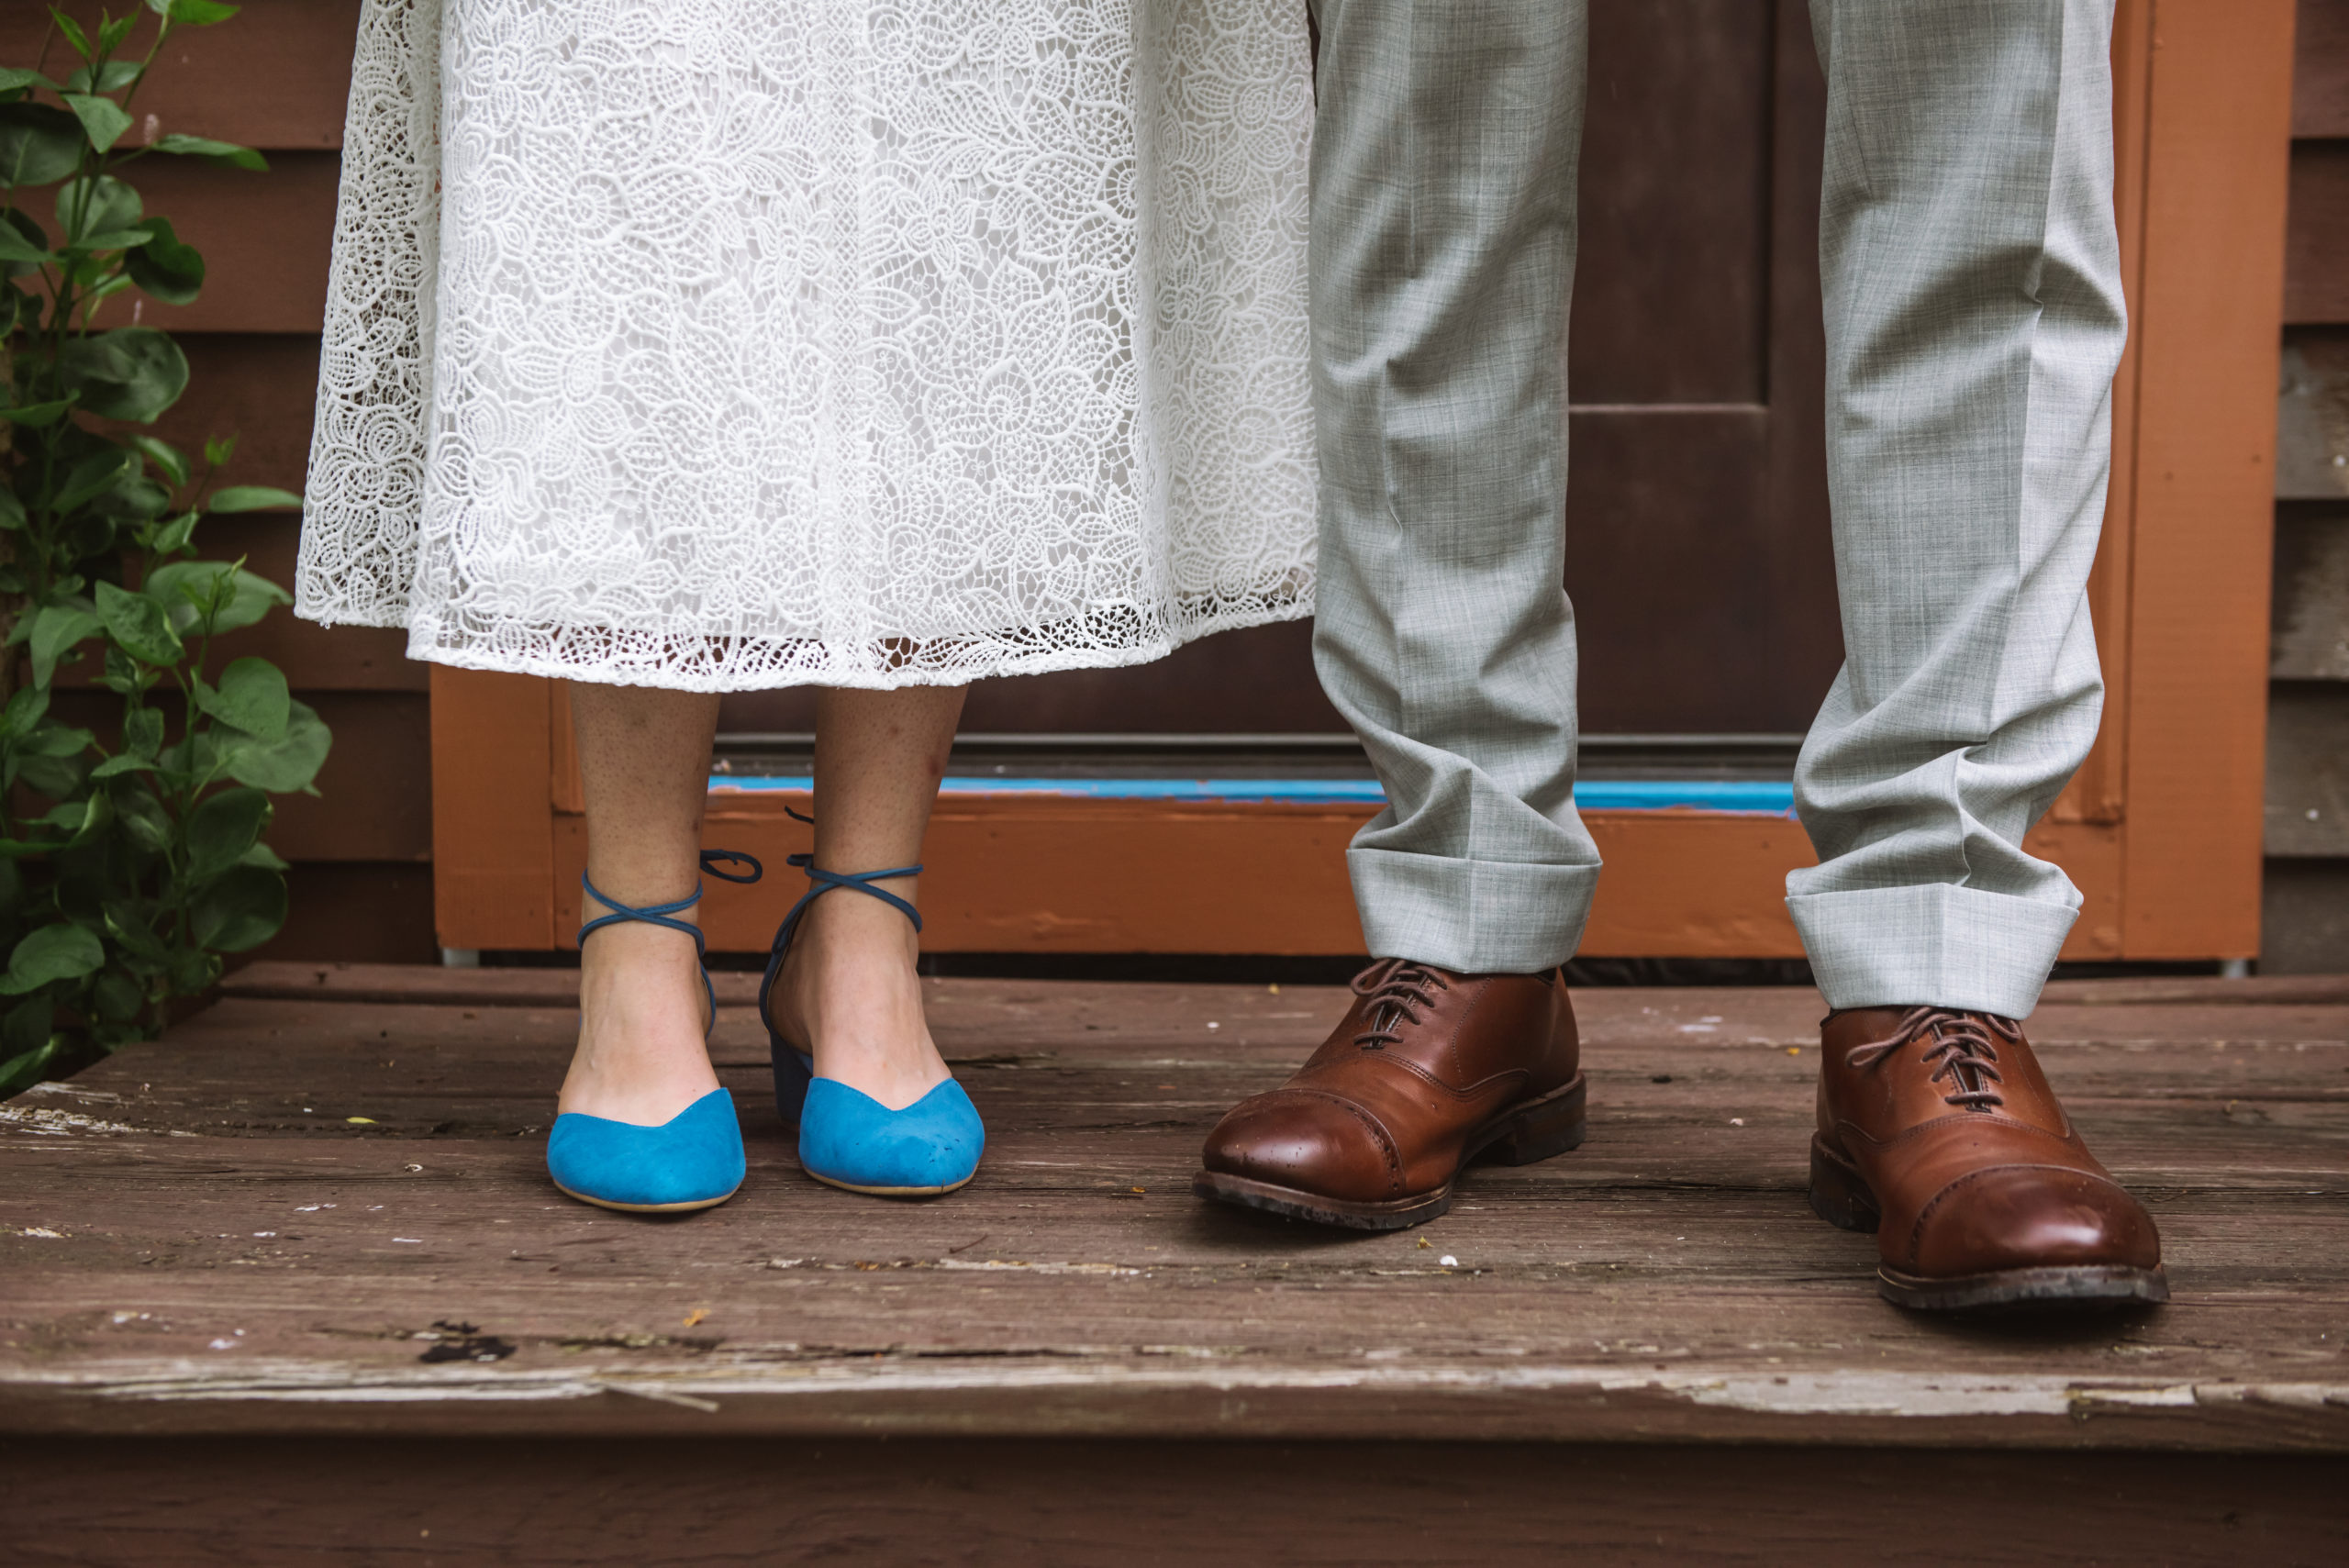 Focus on the bride and groom's feet and ankles. They are standing on a wooden stoop in front of the house's front door. The bride is wearing a white lace dress with blue strappy low heels. The groom is wearing brown dress shoes and light grey suit pants.